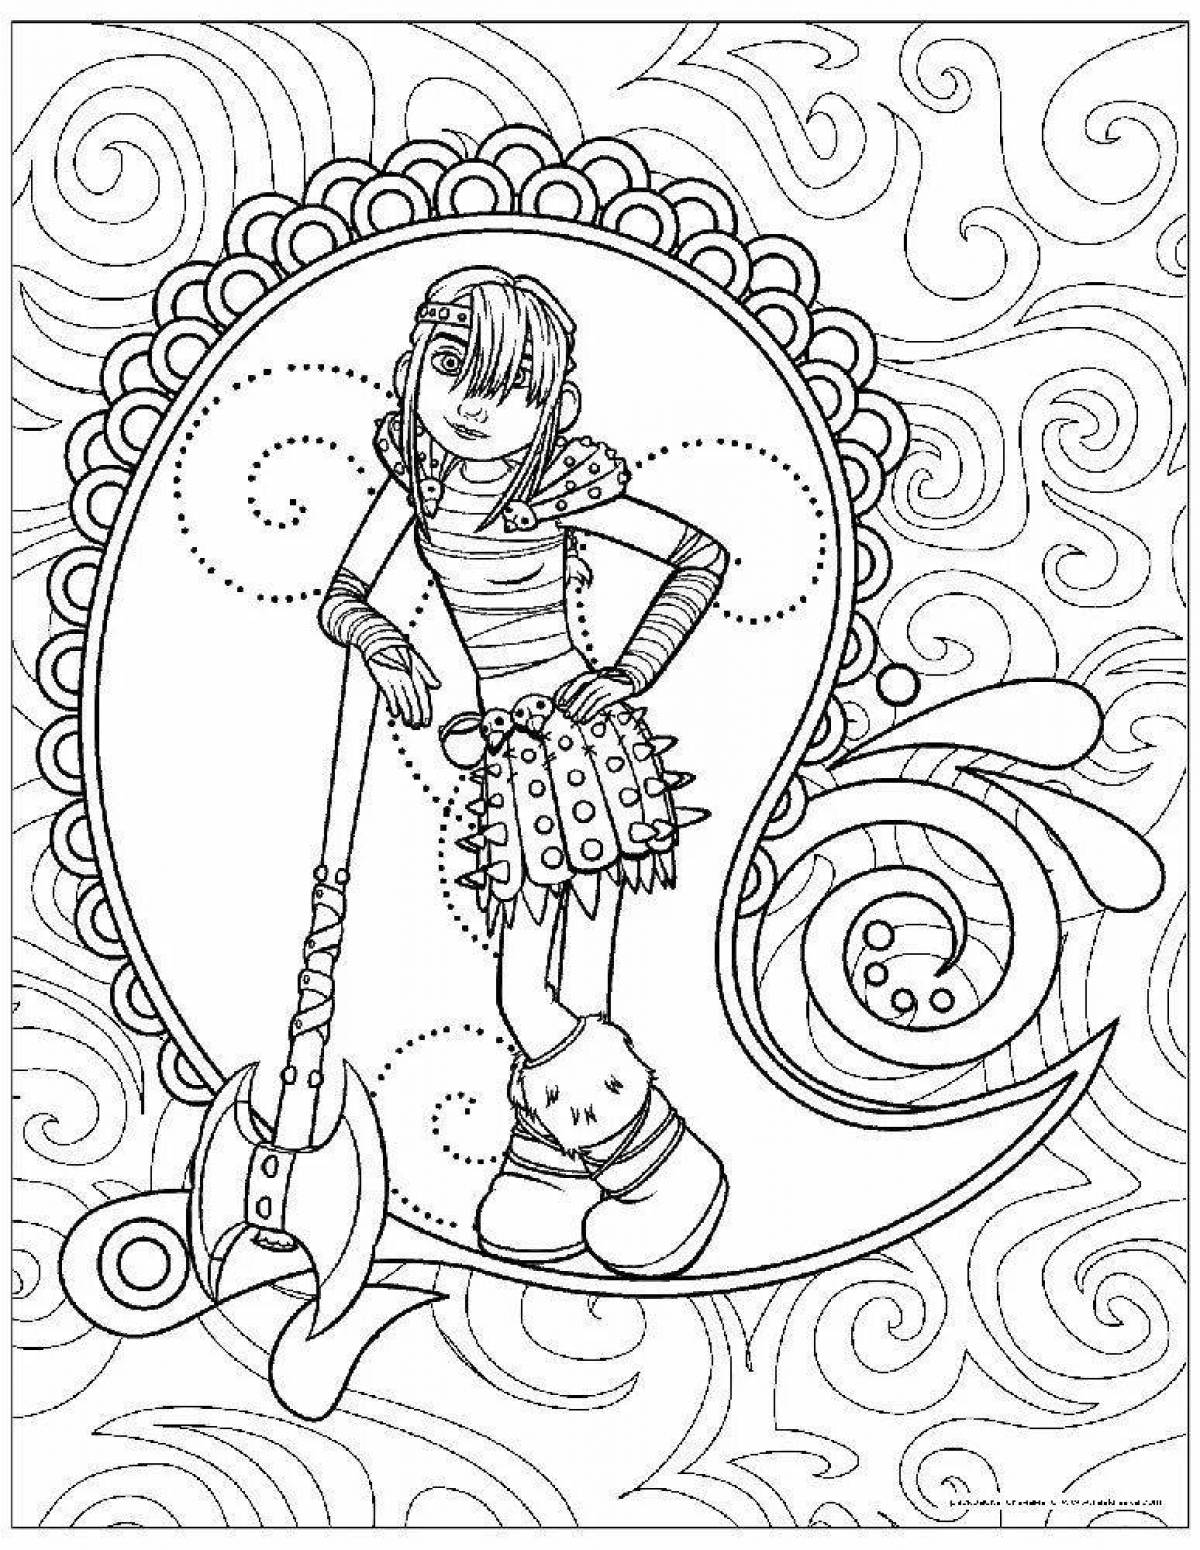 Glorious as a coloring page